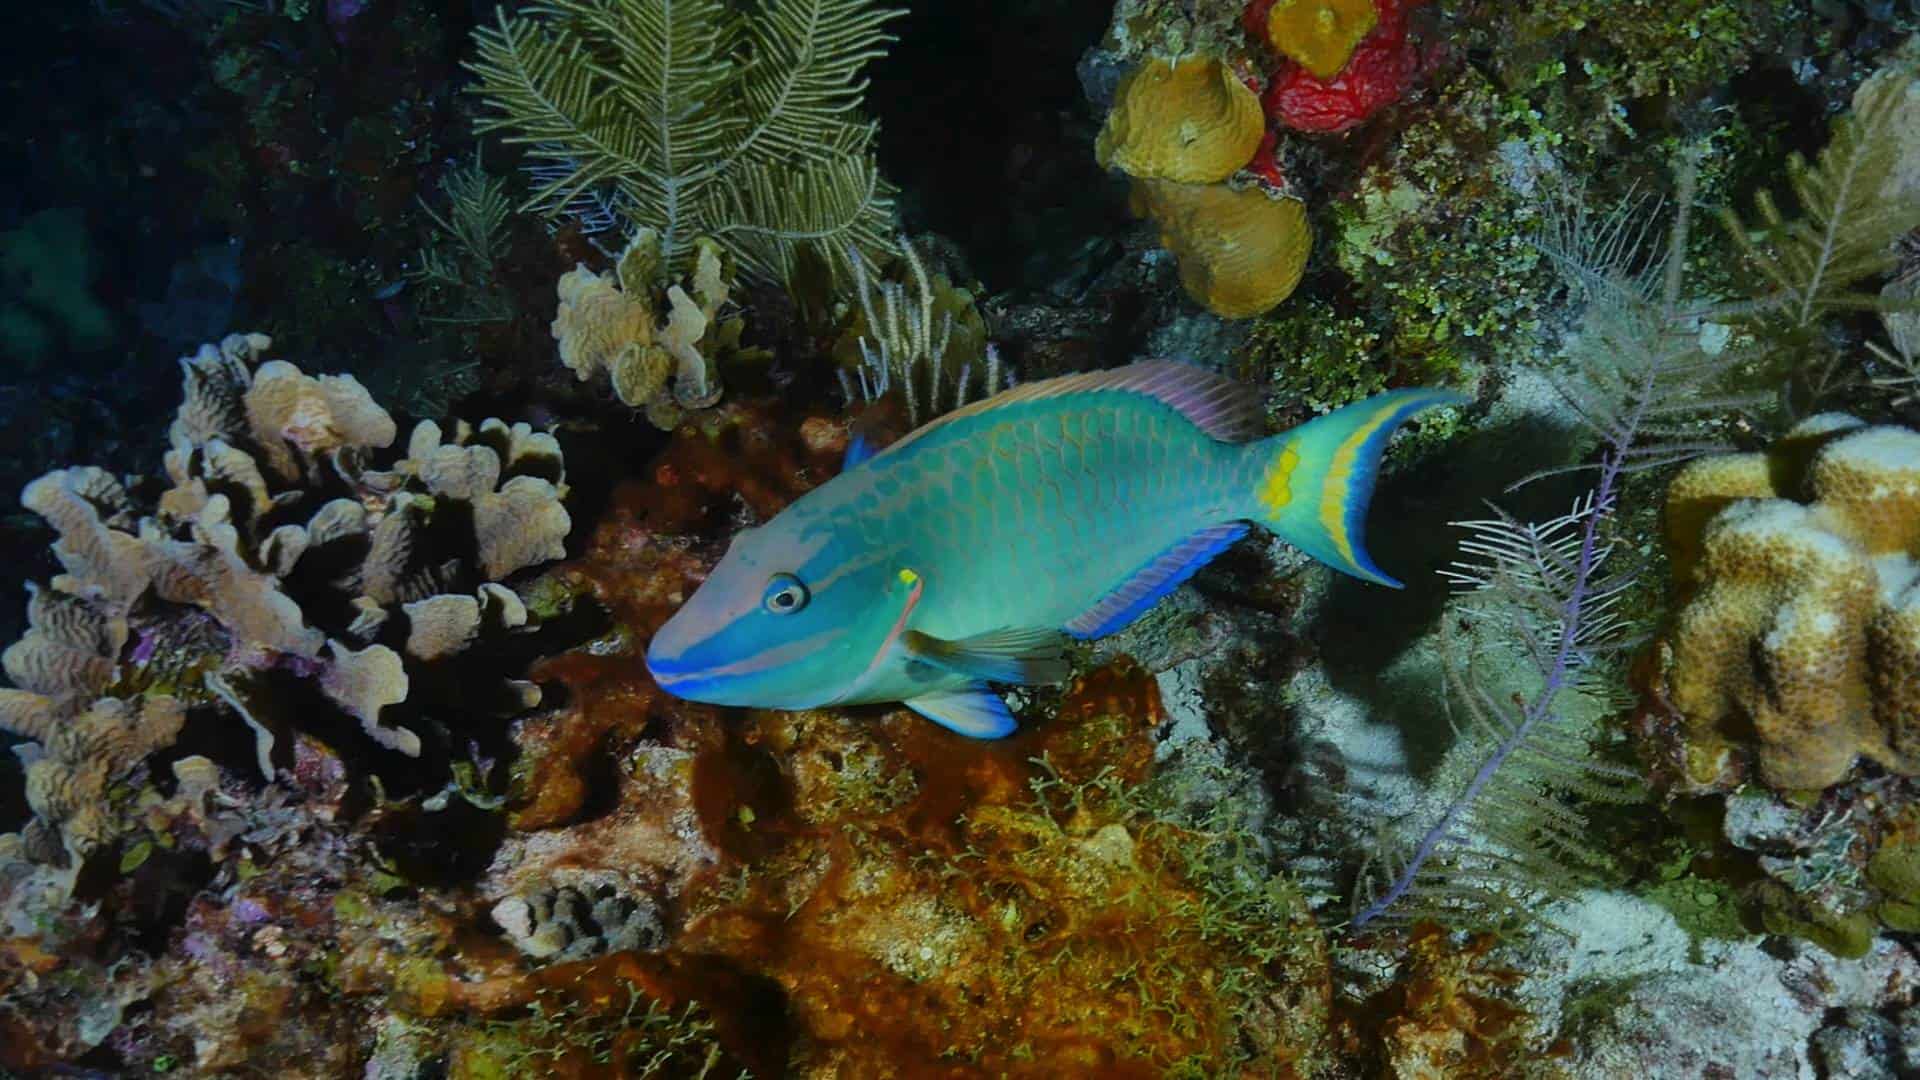 Parrotfish seen at night on Belize barrier reef